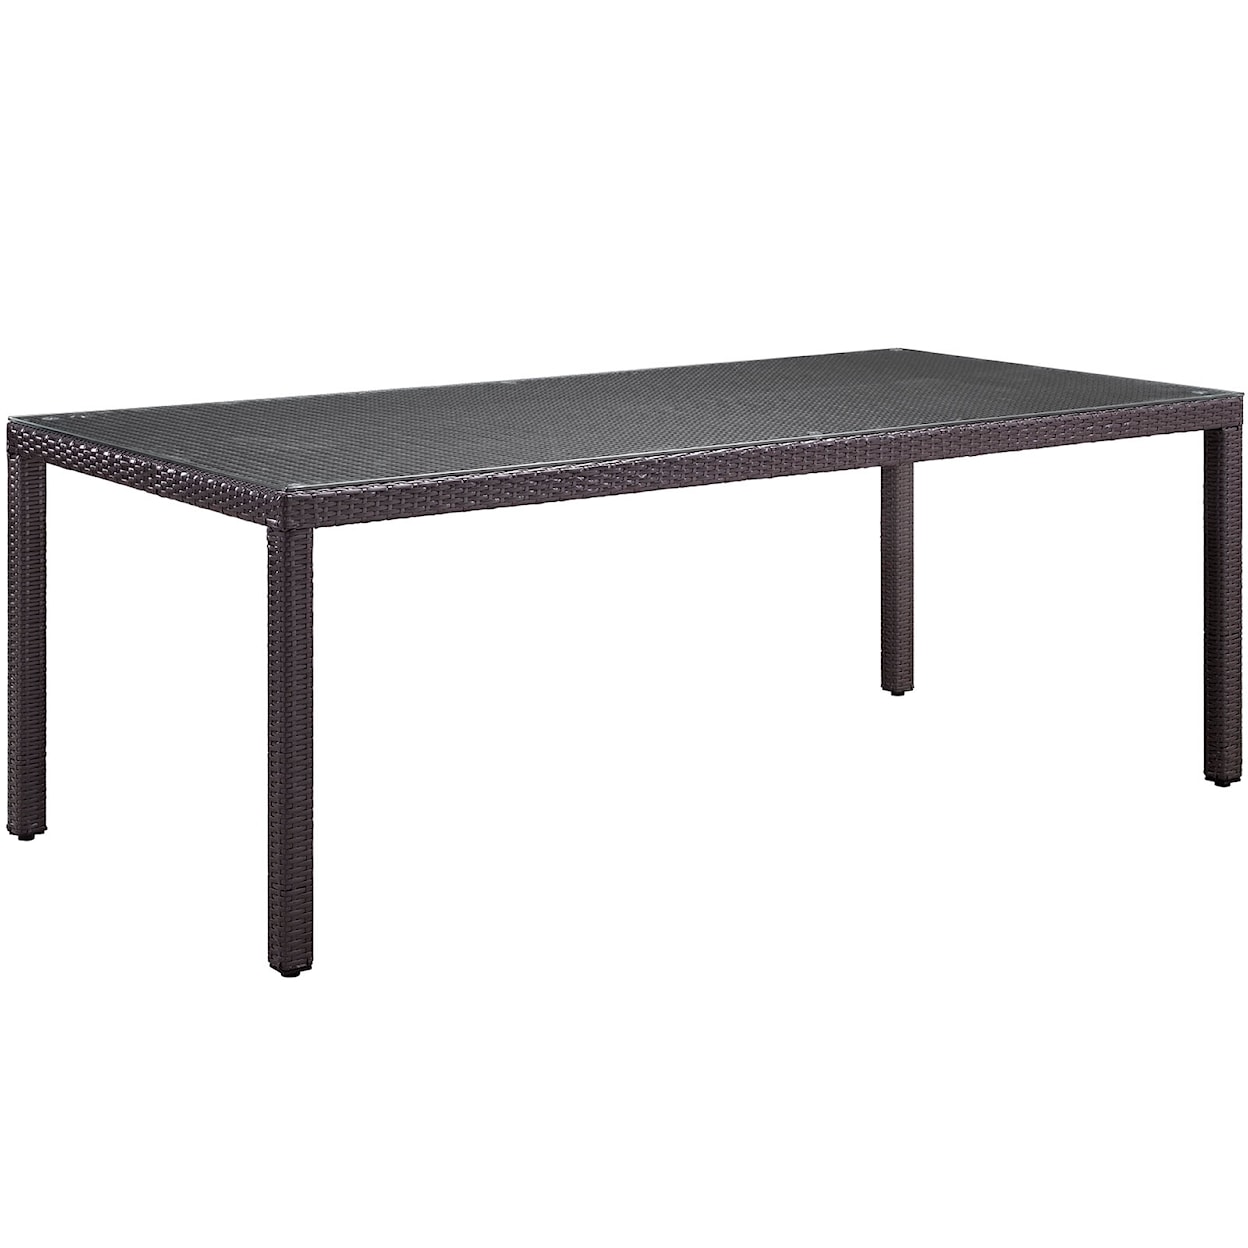 Modway Convene 82" Outdoor Dining Table